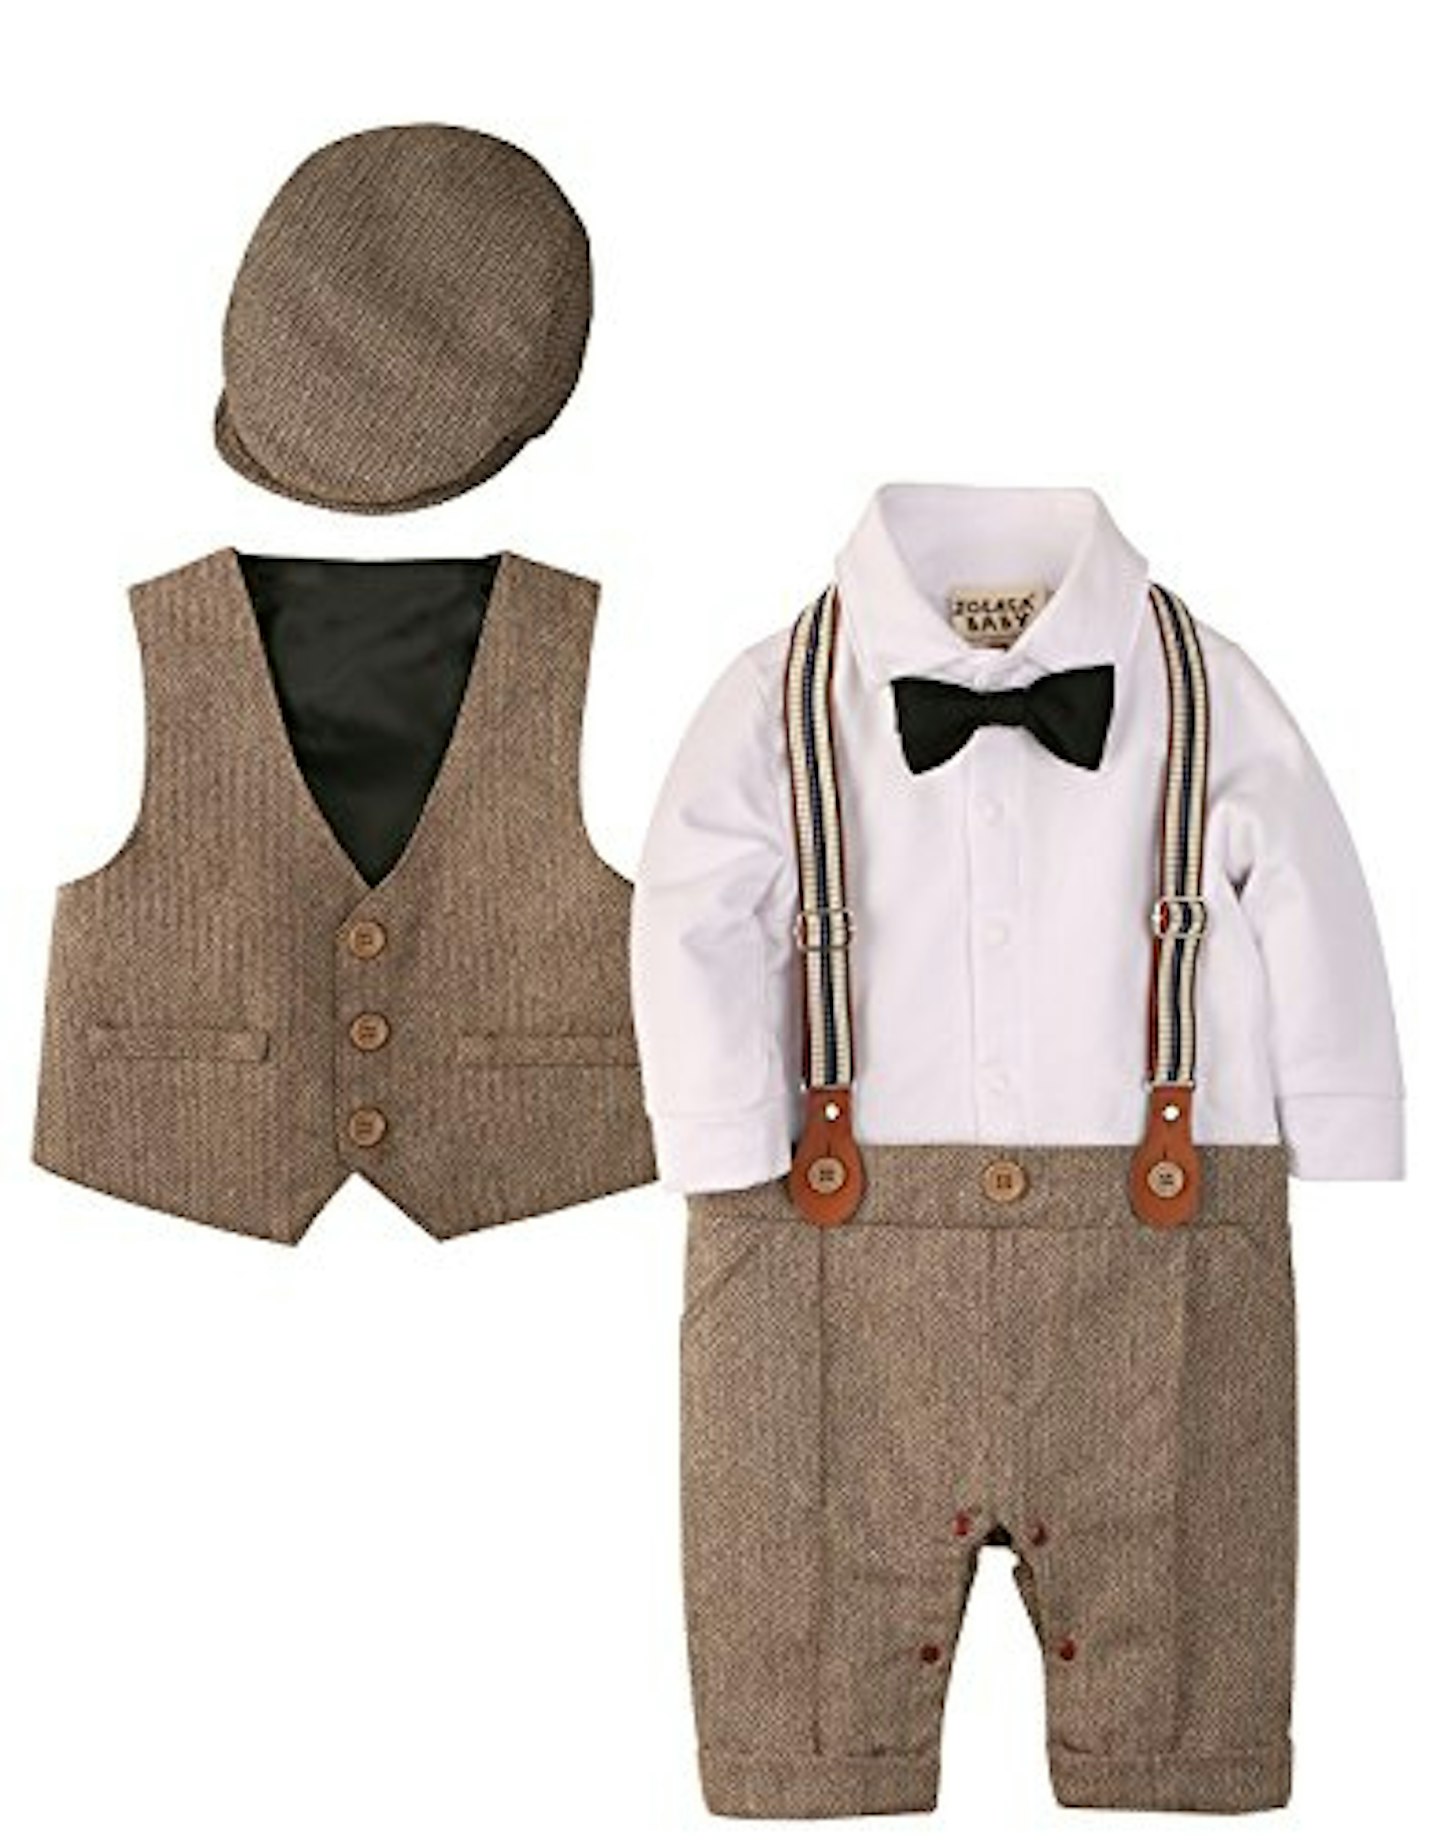 ZOEREA Baby Boy Outfits Set